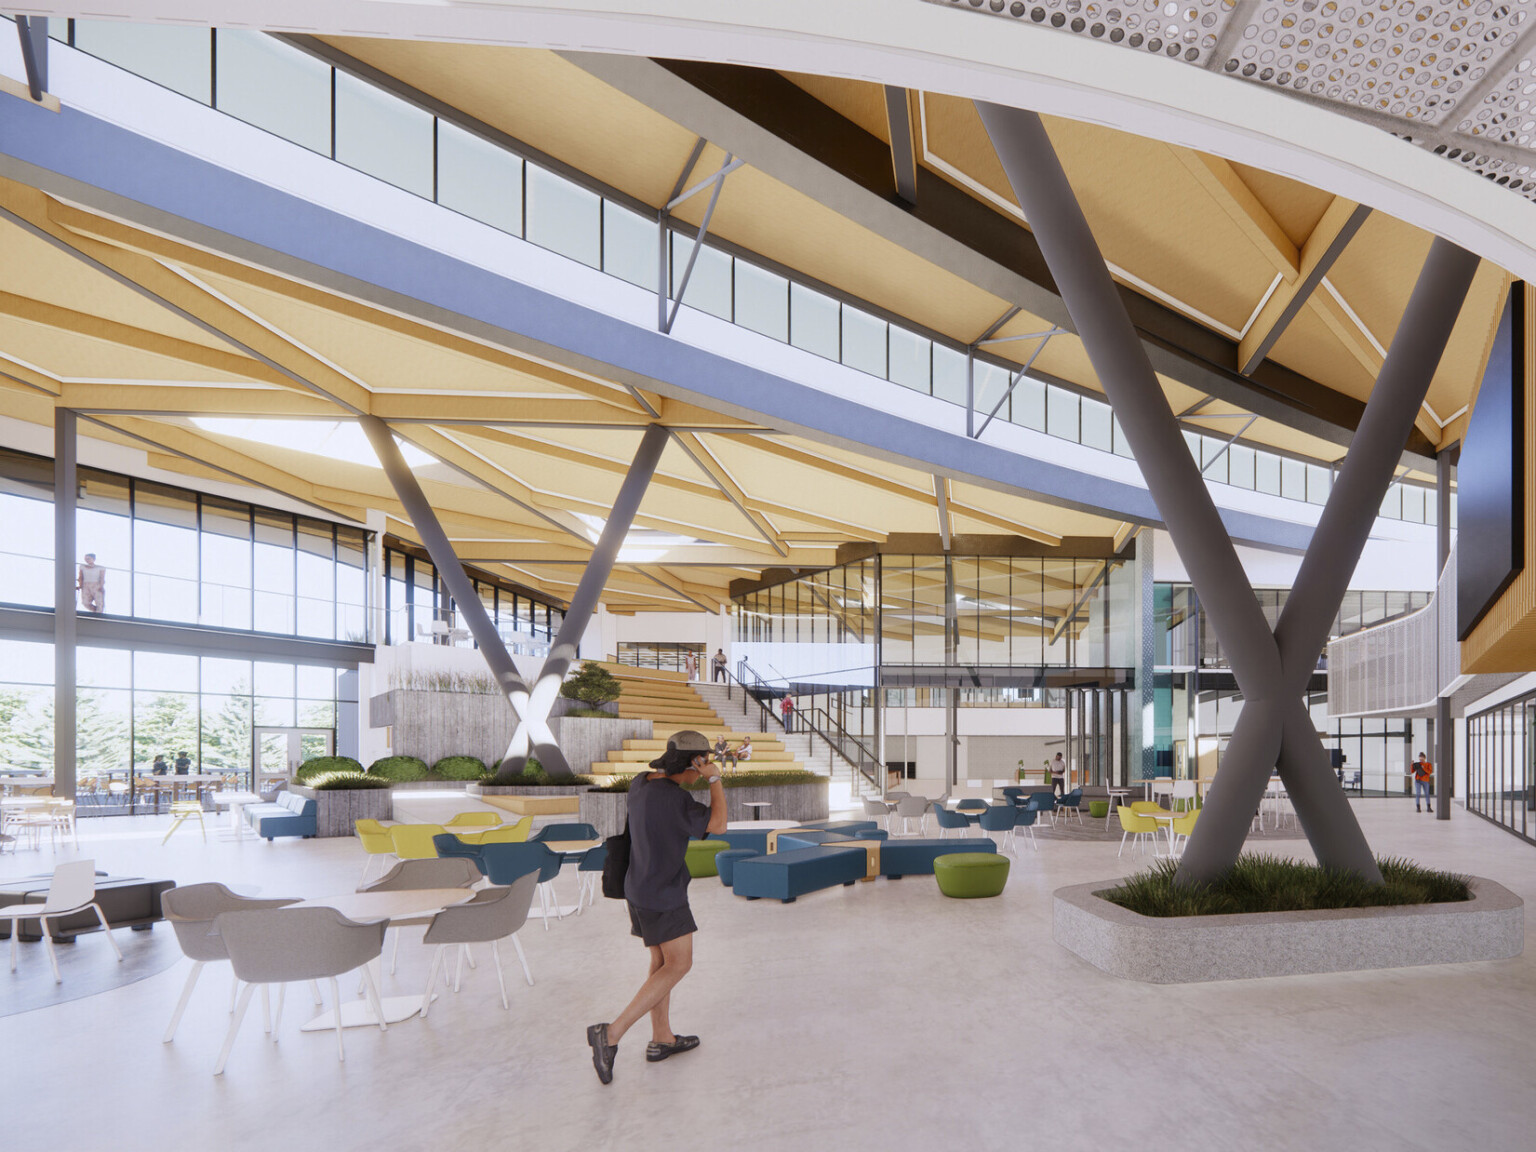 Interior double height lobby space in school. Biophilia elements, plant wall, mixed colorful seating. Mass timber wood, large windows